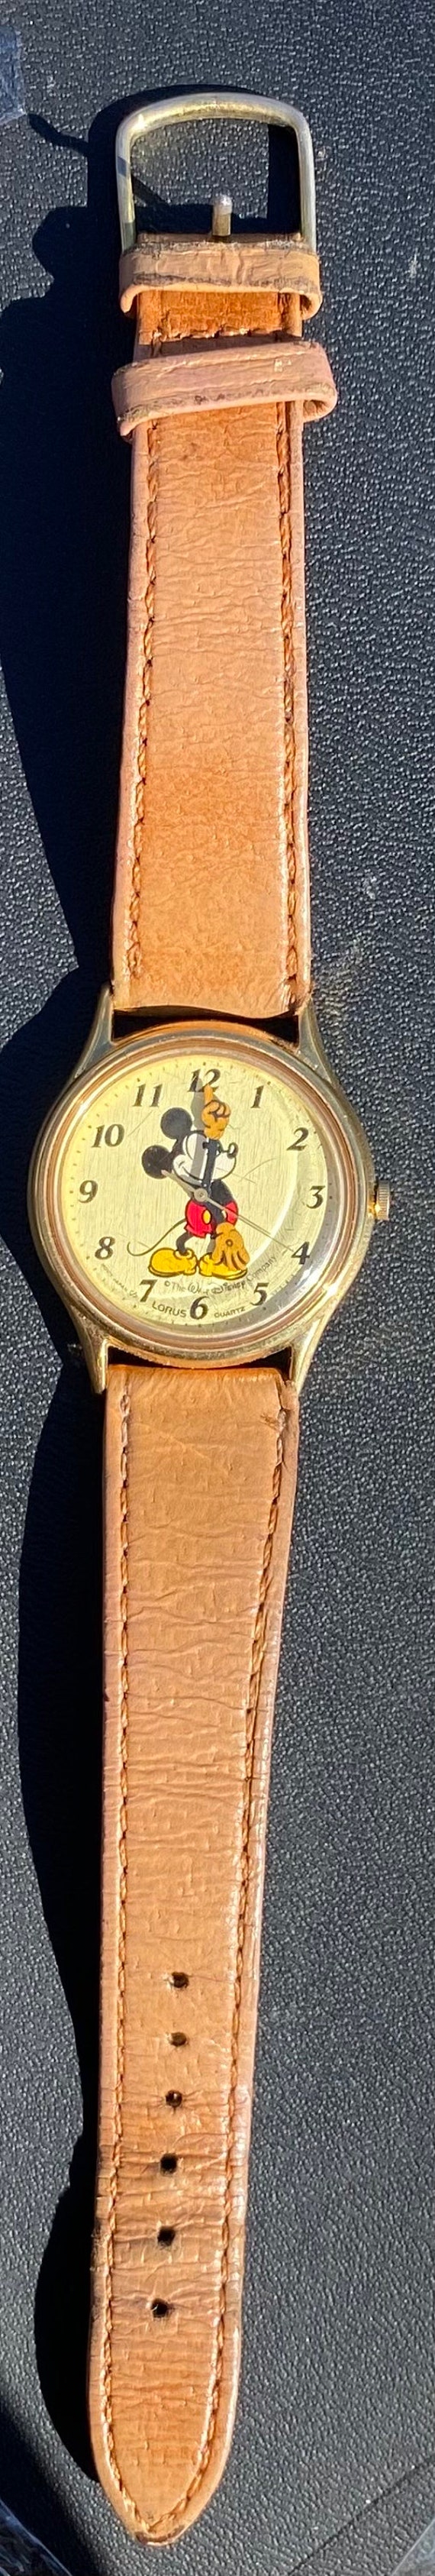 Lorus Mickey Mouse Watch V515-6000 Gold Tone Dial 